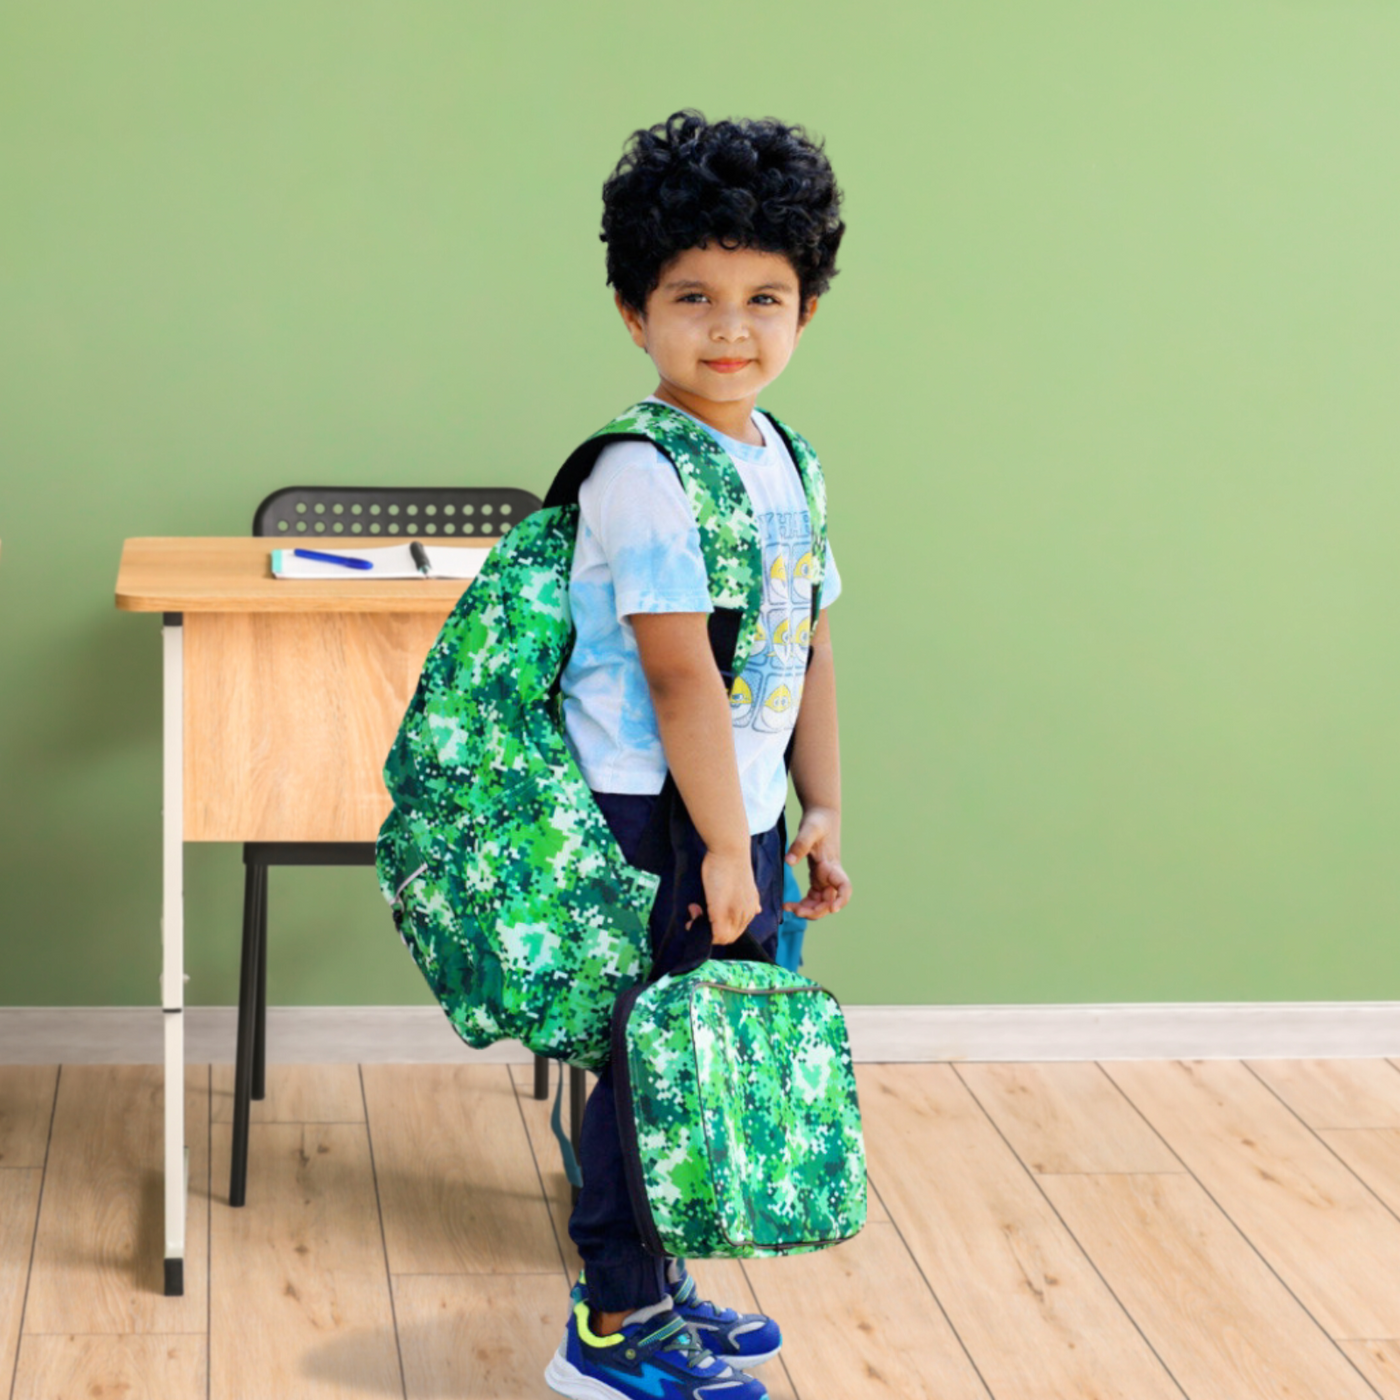 Kids Backpack and Lunch Box Set, Butterfly, Green, Gives Back to Great –  Fenrici Brands